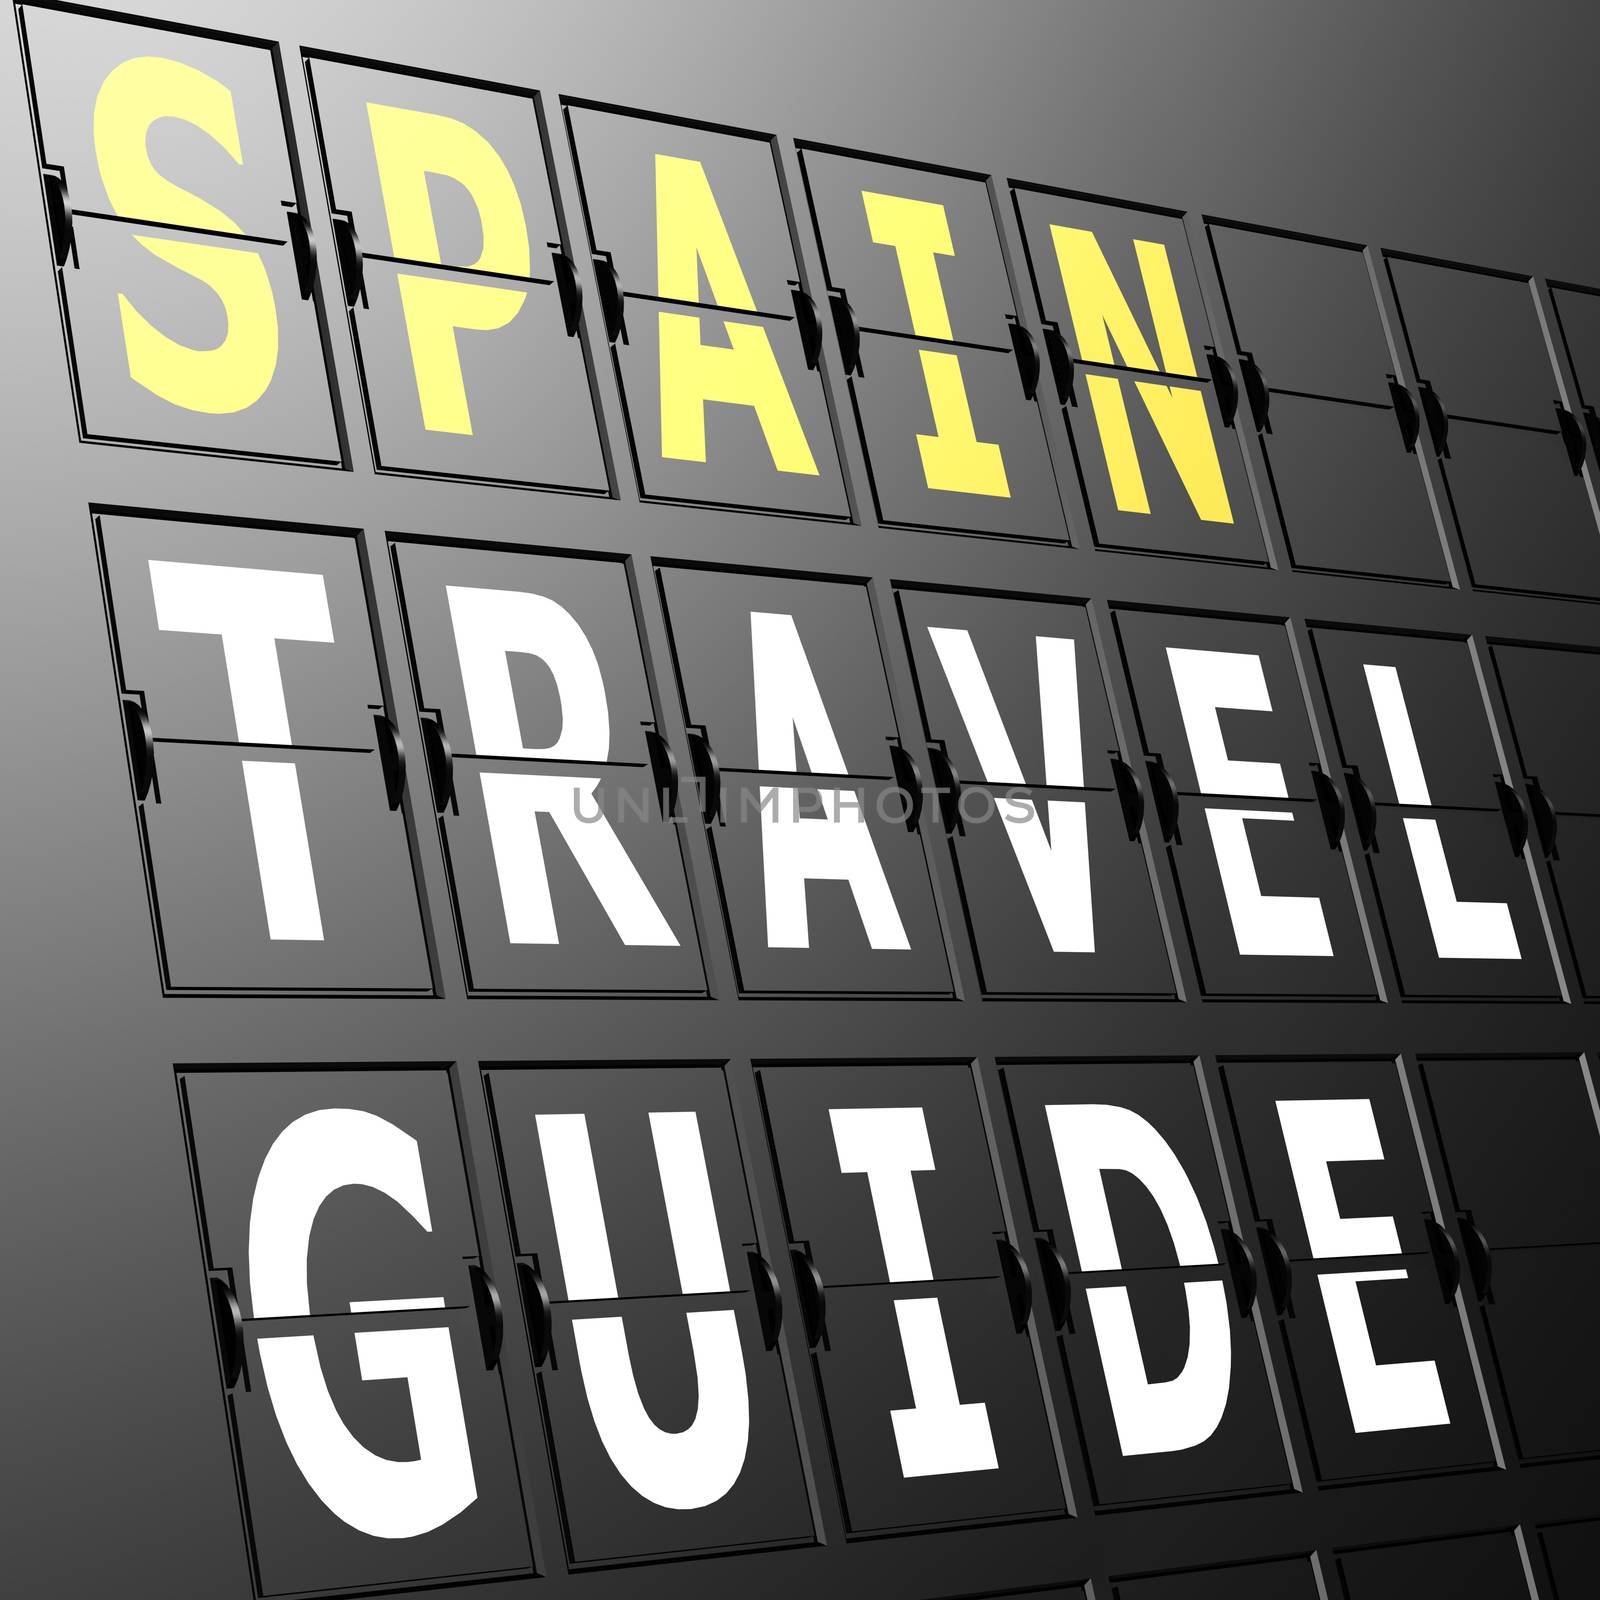 Airport display Spain travel guide by tang90246